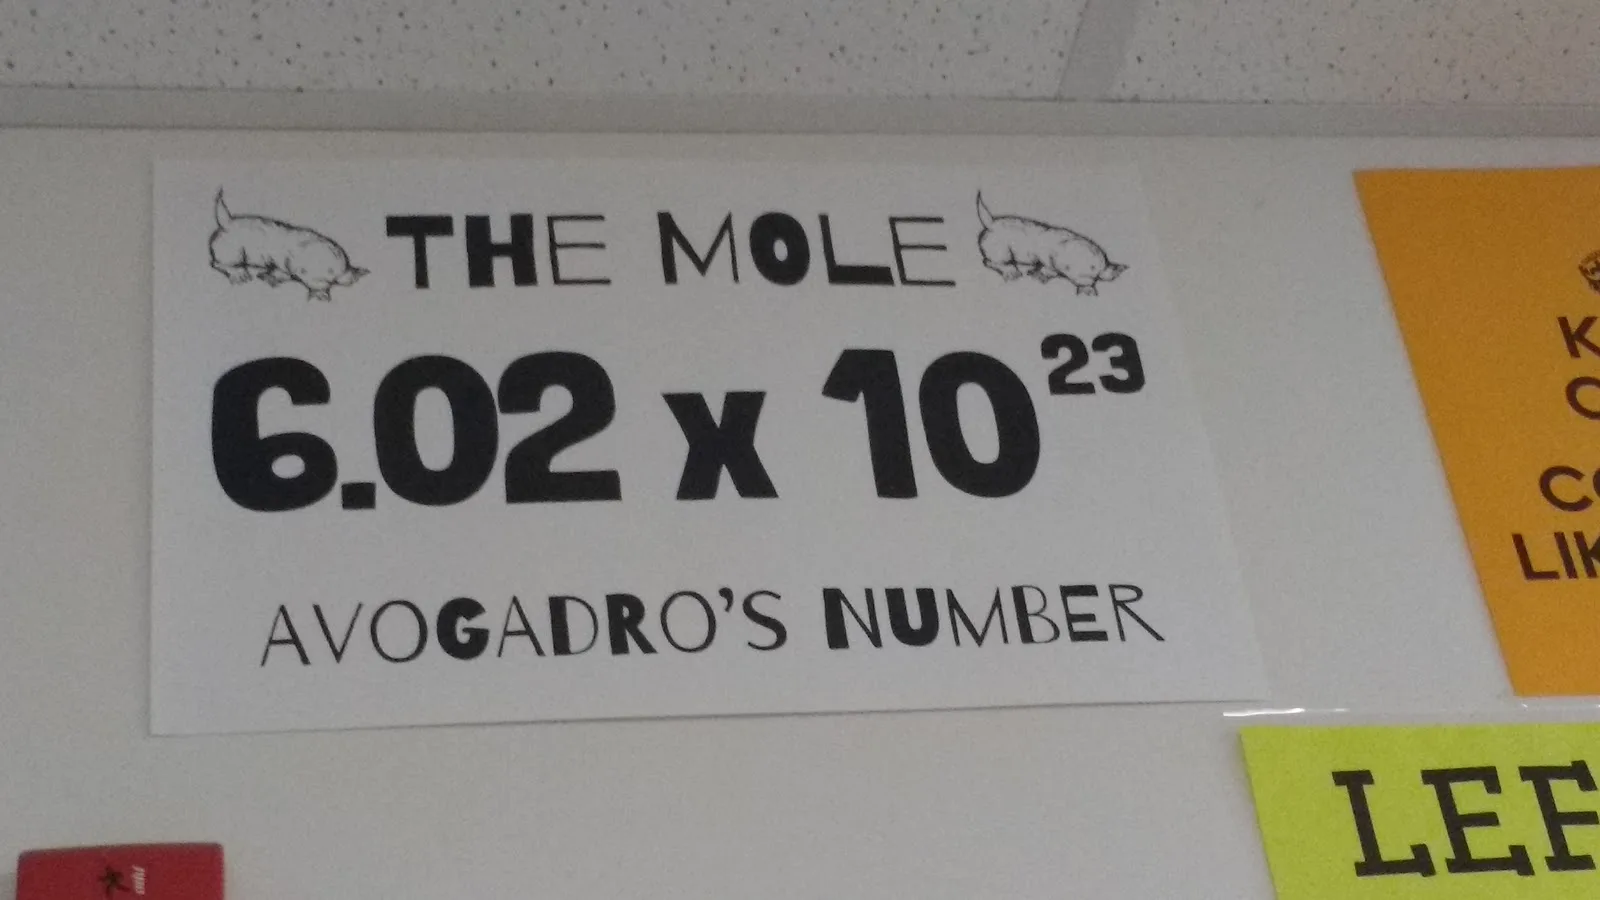 mole poster avogadro's number - decoration for high school physical science or chemistry classroom